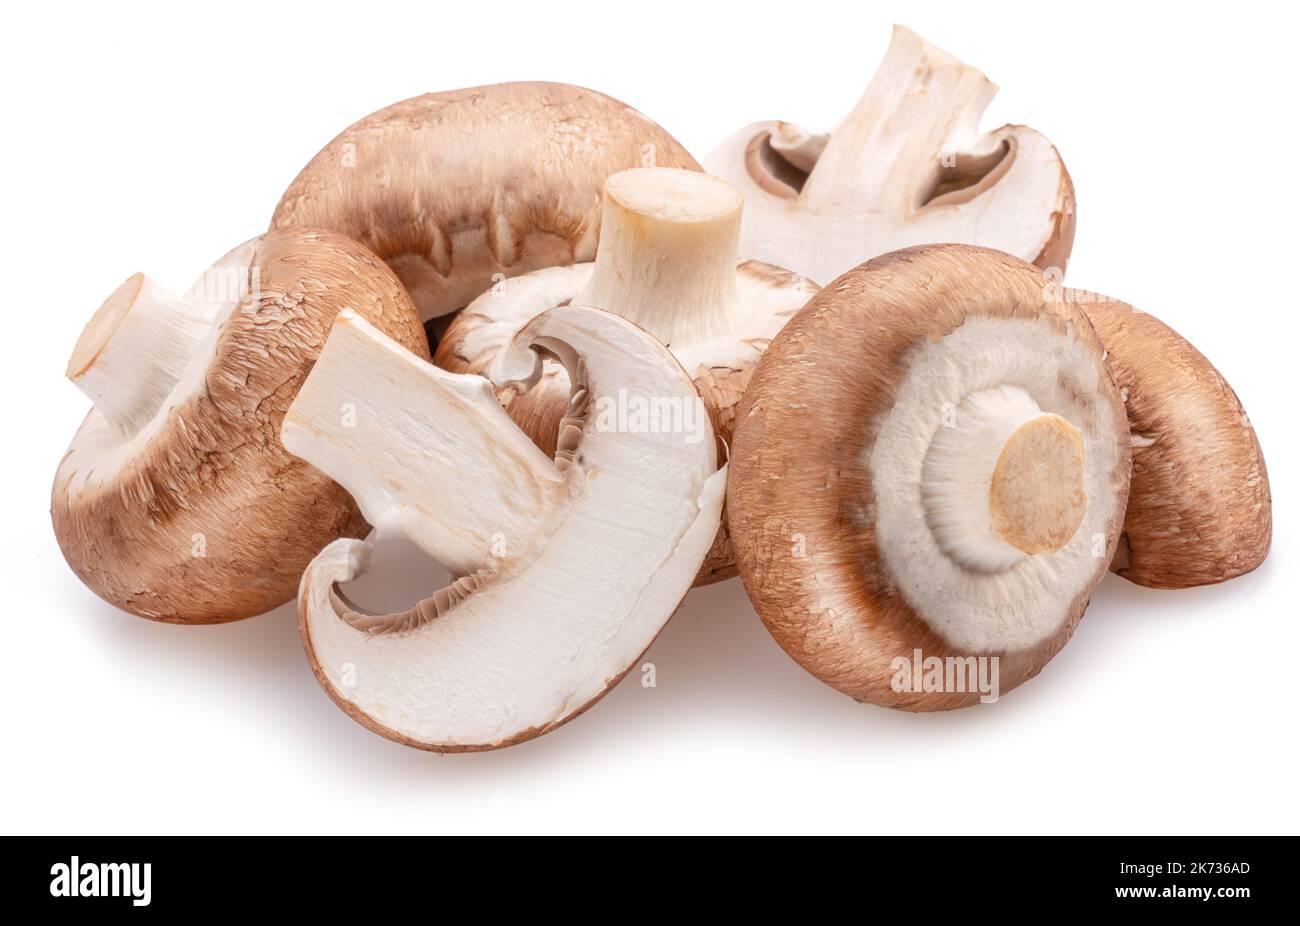 Brown cap champignons with slices of champignon mushroom isolated on white background. Close-up. Stock Photo